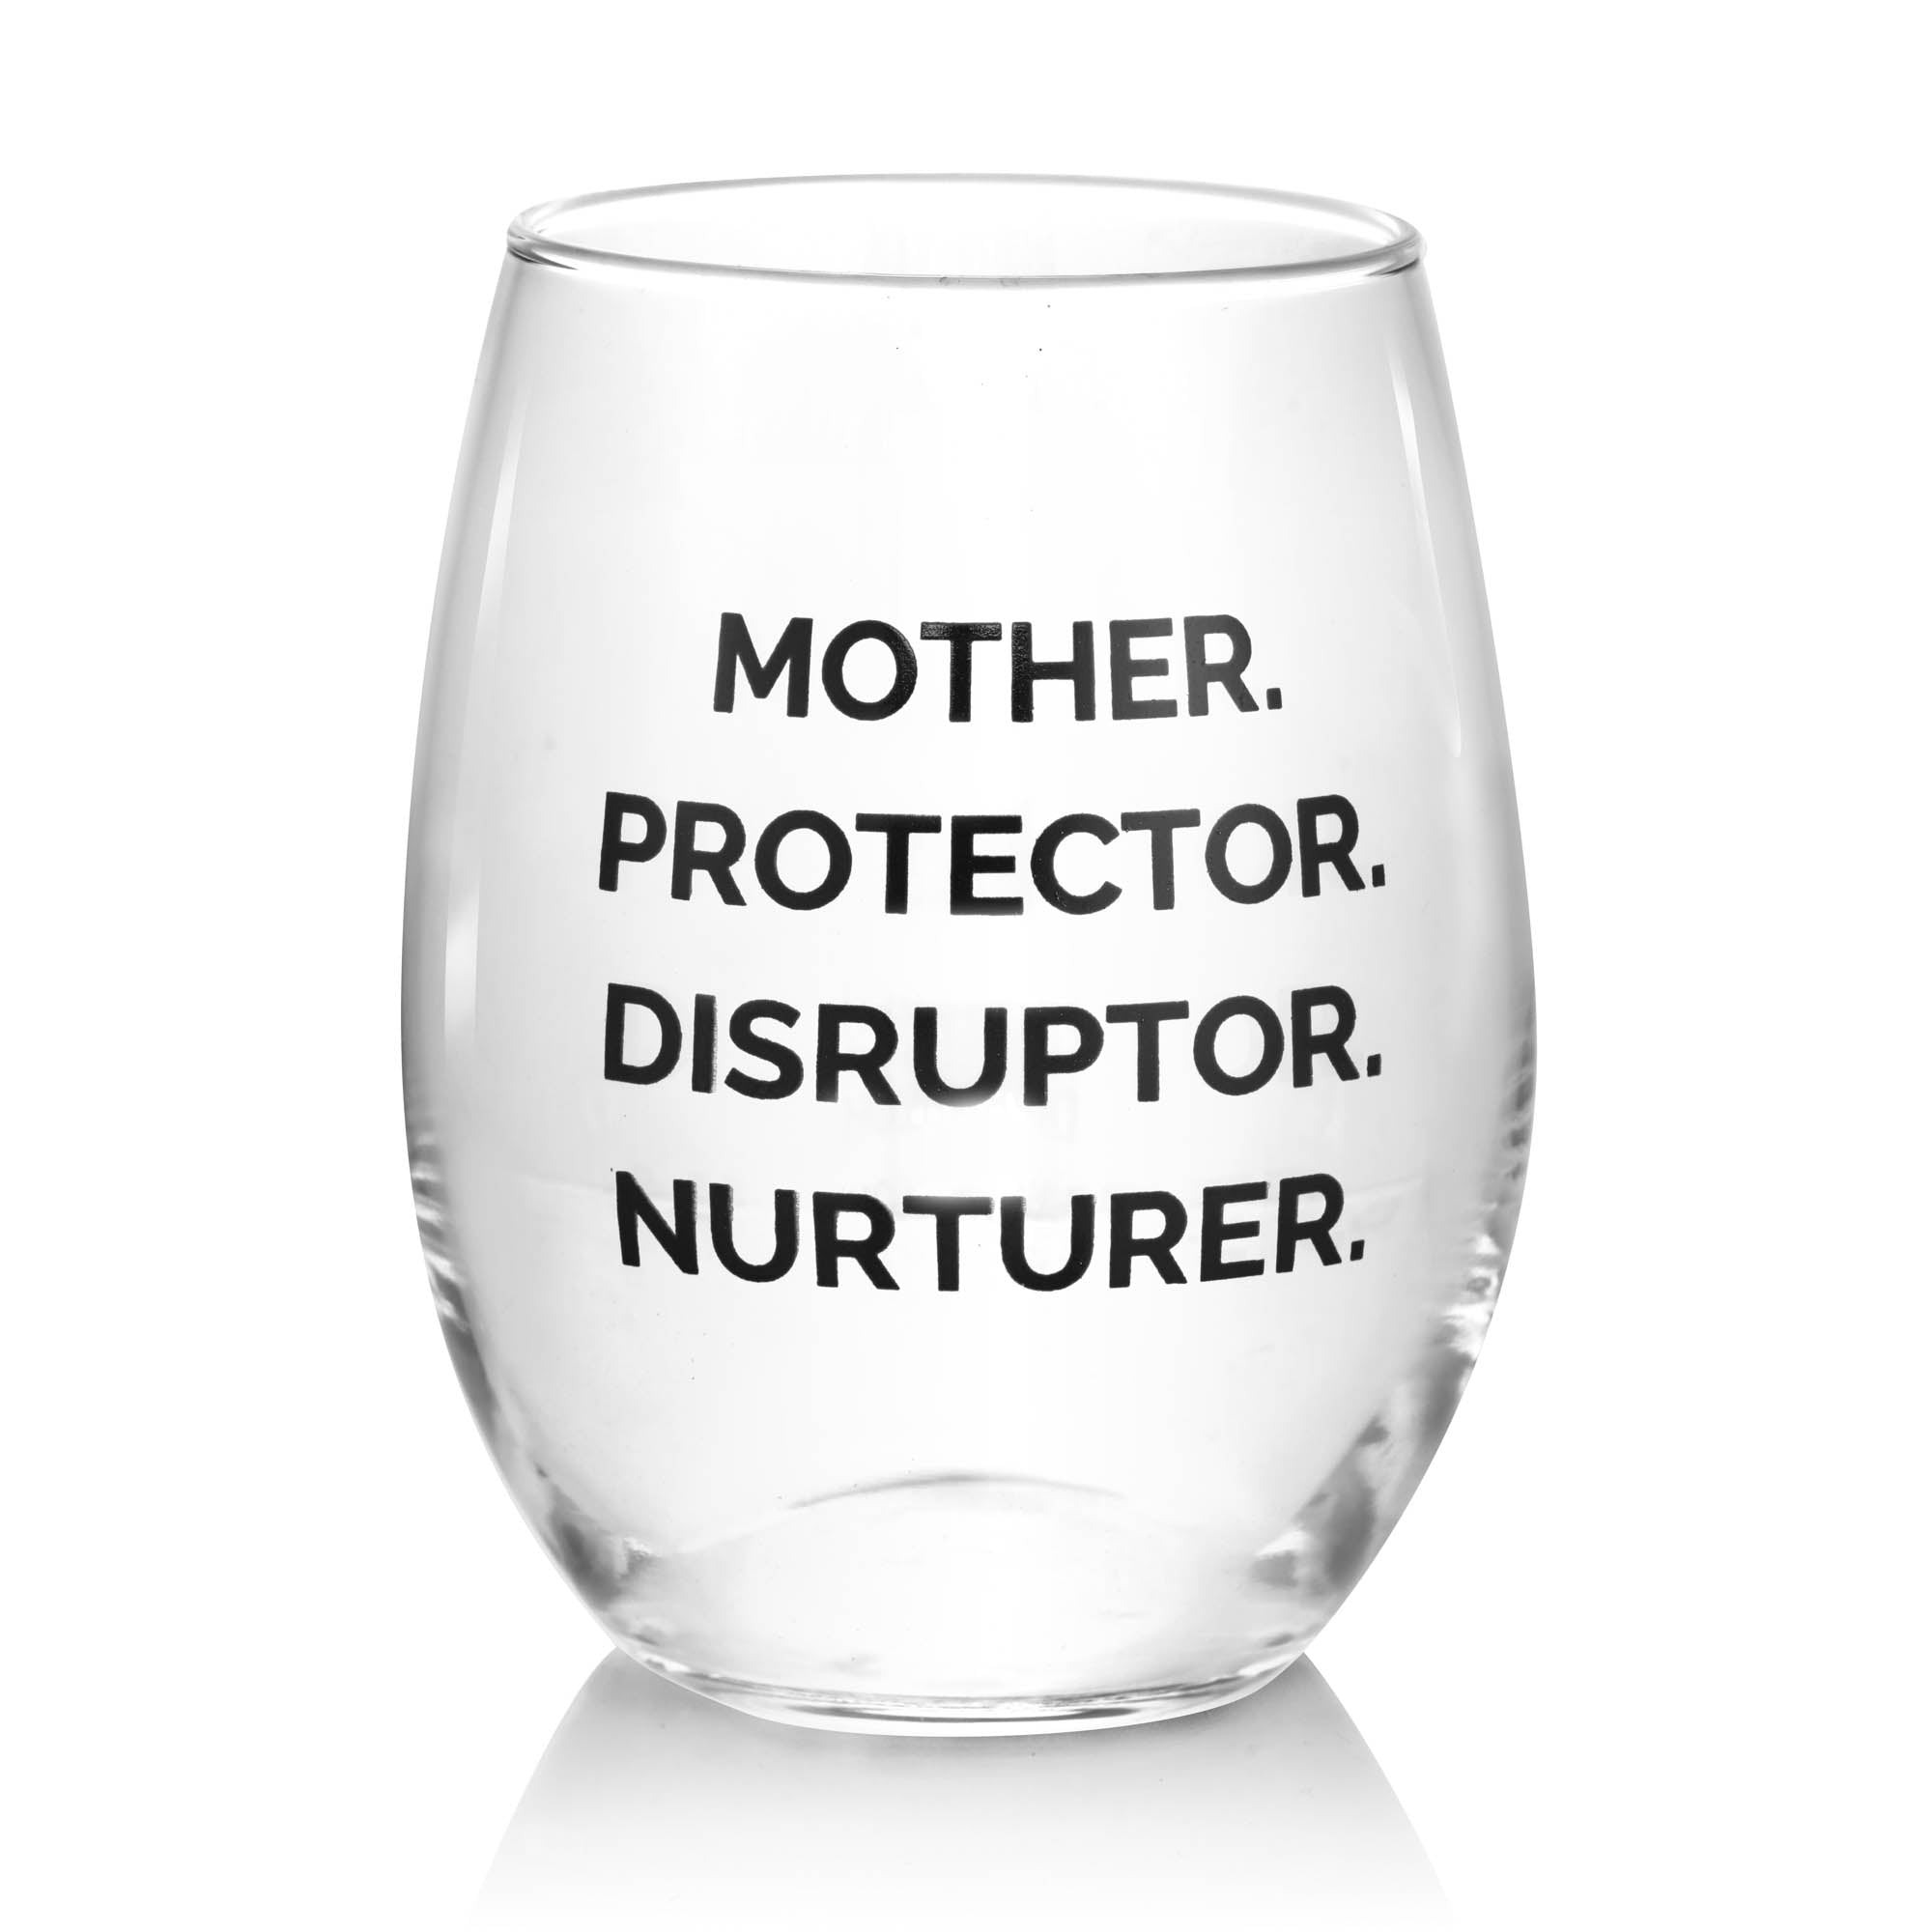 NOUNS TELL OUR STORY STEMLESS WINE GLASS - The REBEL Tribe - accessories, outwear, stem less glass. wine glass, genuine, nouns, statement nouns, motherhood, mother's special. transparent, perfect gift, protective